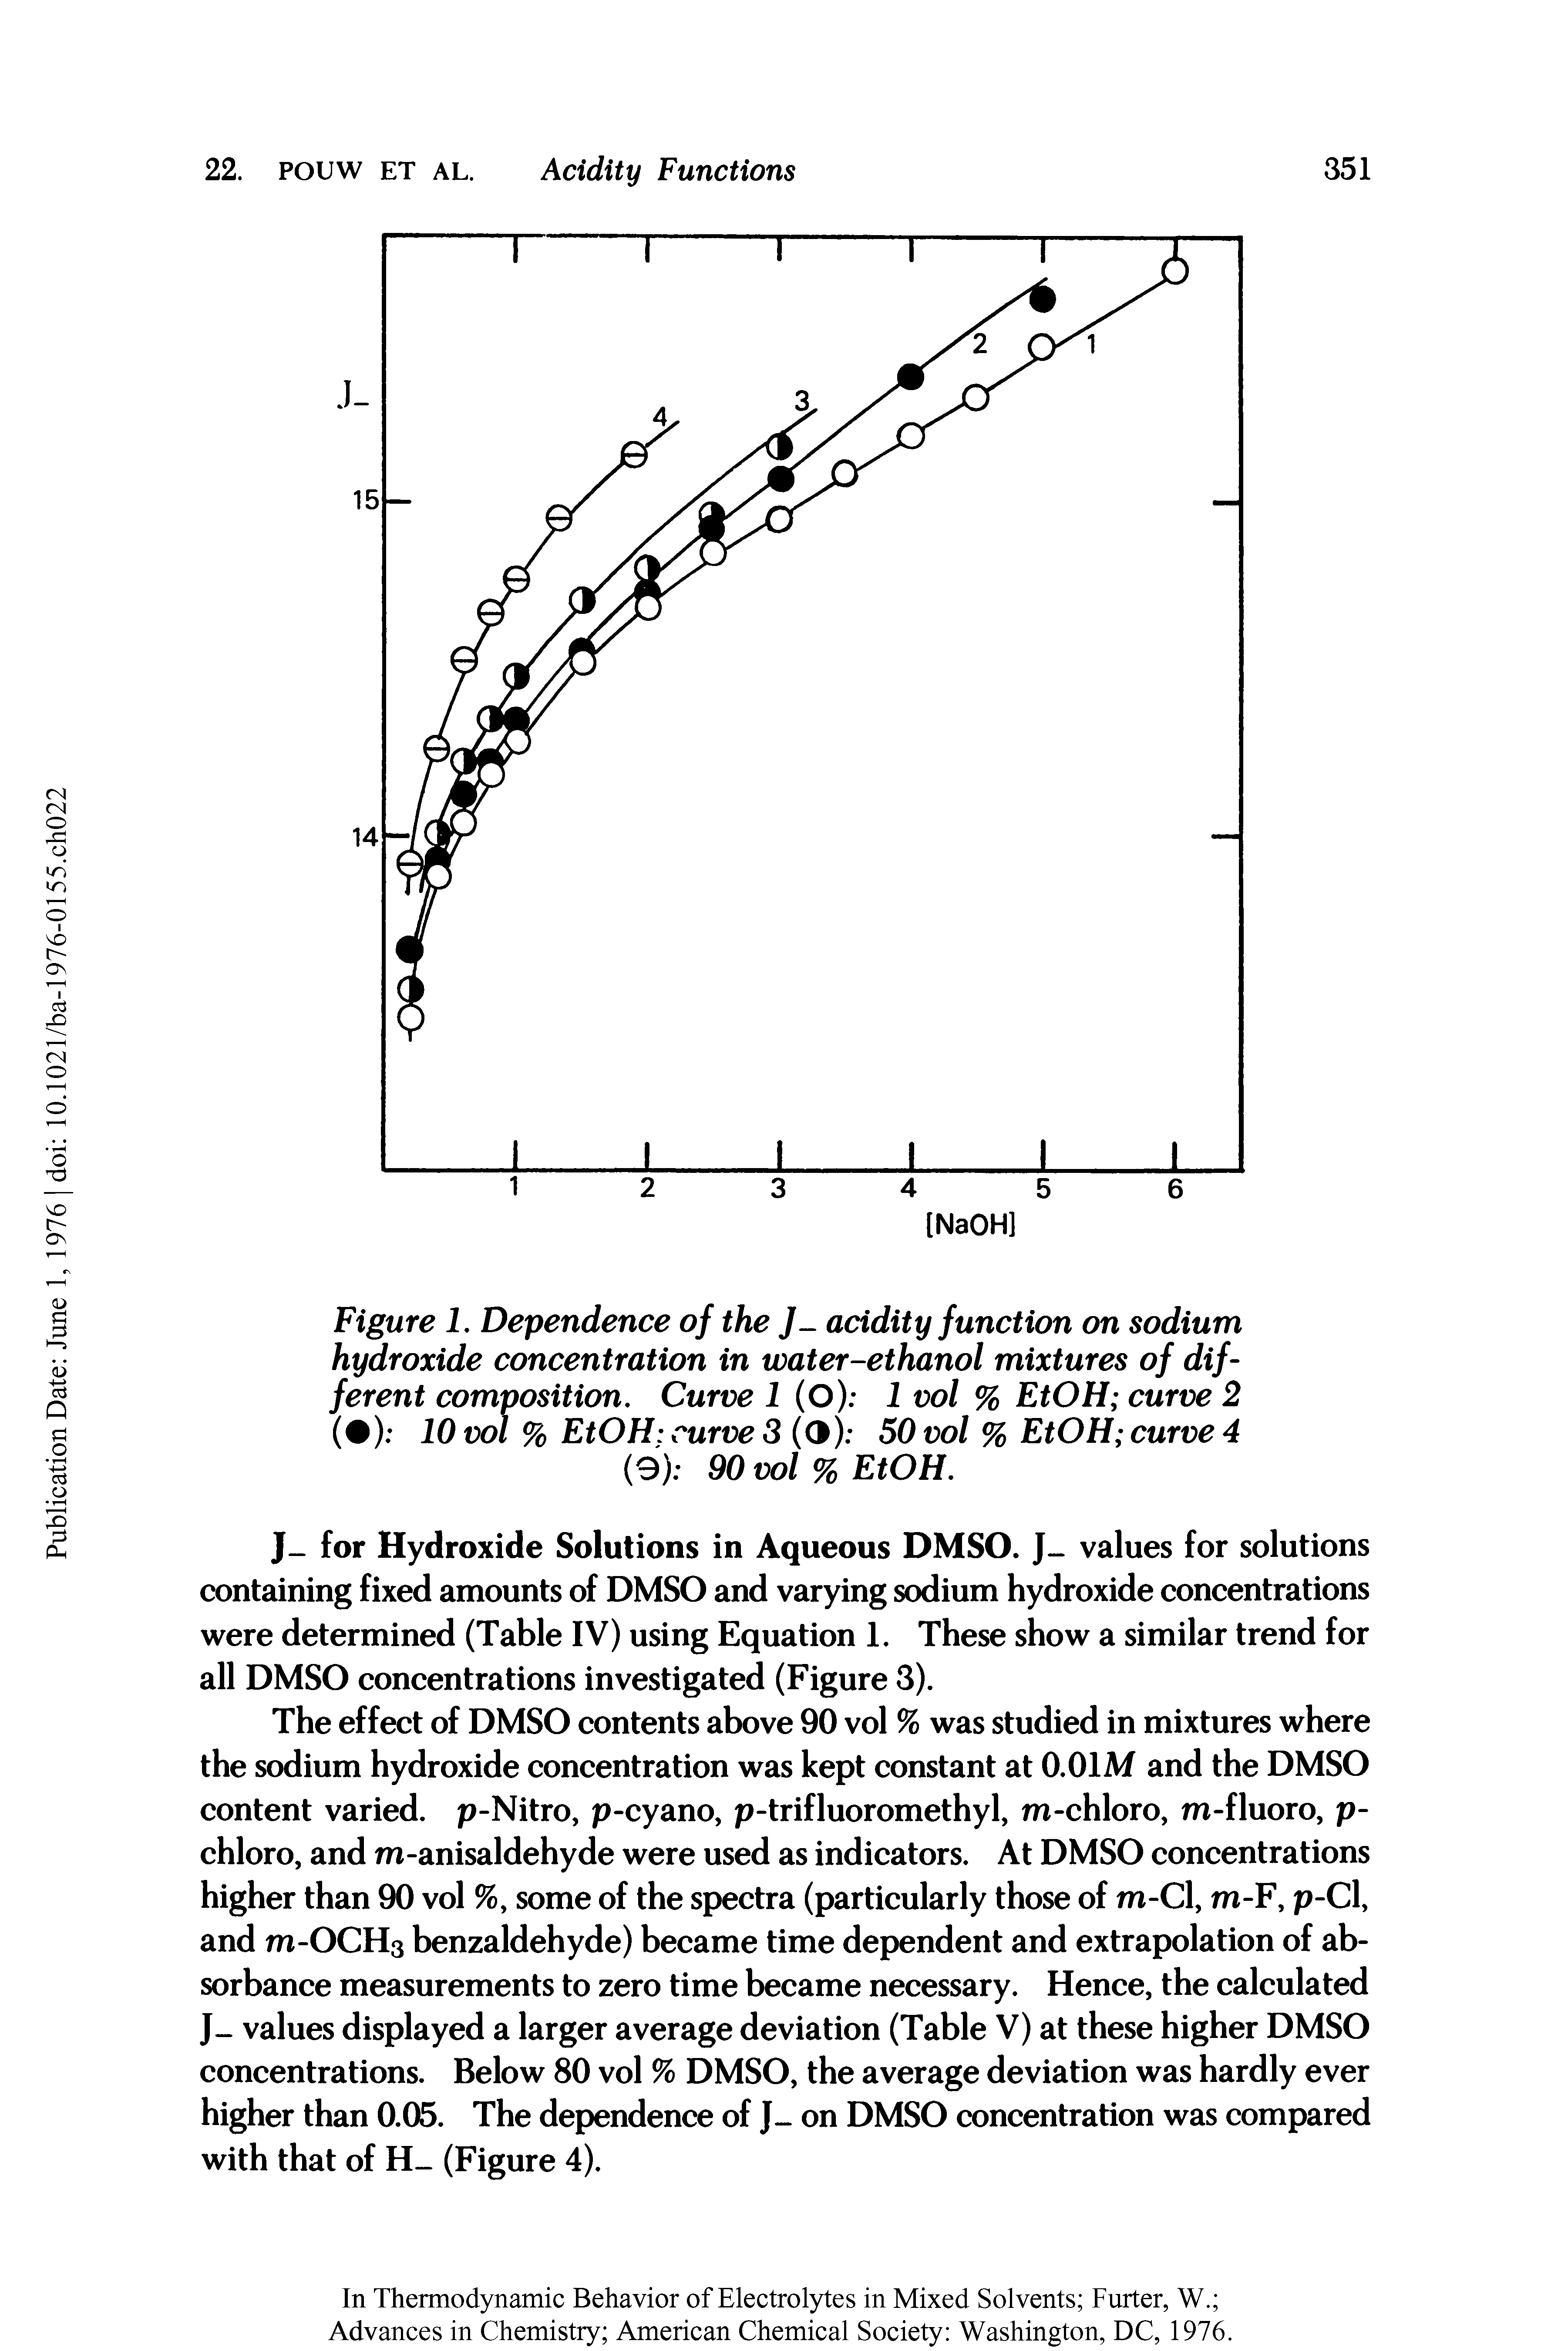 Figure 1. Dependence of the J- acidity function on sodium hydroxide concentration in water-ethanol mixtures of different composition. Curve 1 (O) J vol % EtOH curve 2 ( ) 10 vol % EtOH curve 3 (O) 50 vol % EtOH curve 4 (9) 90 vol % EtOH.